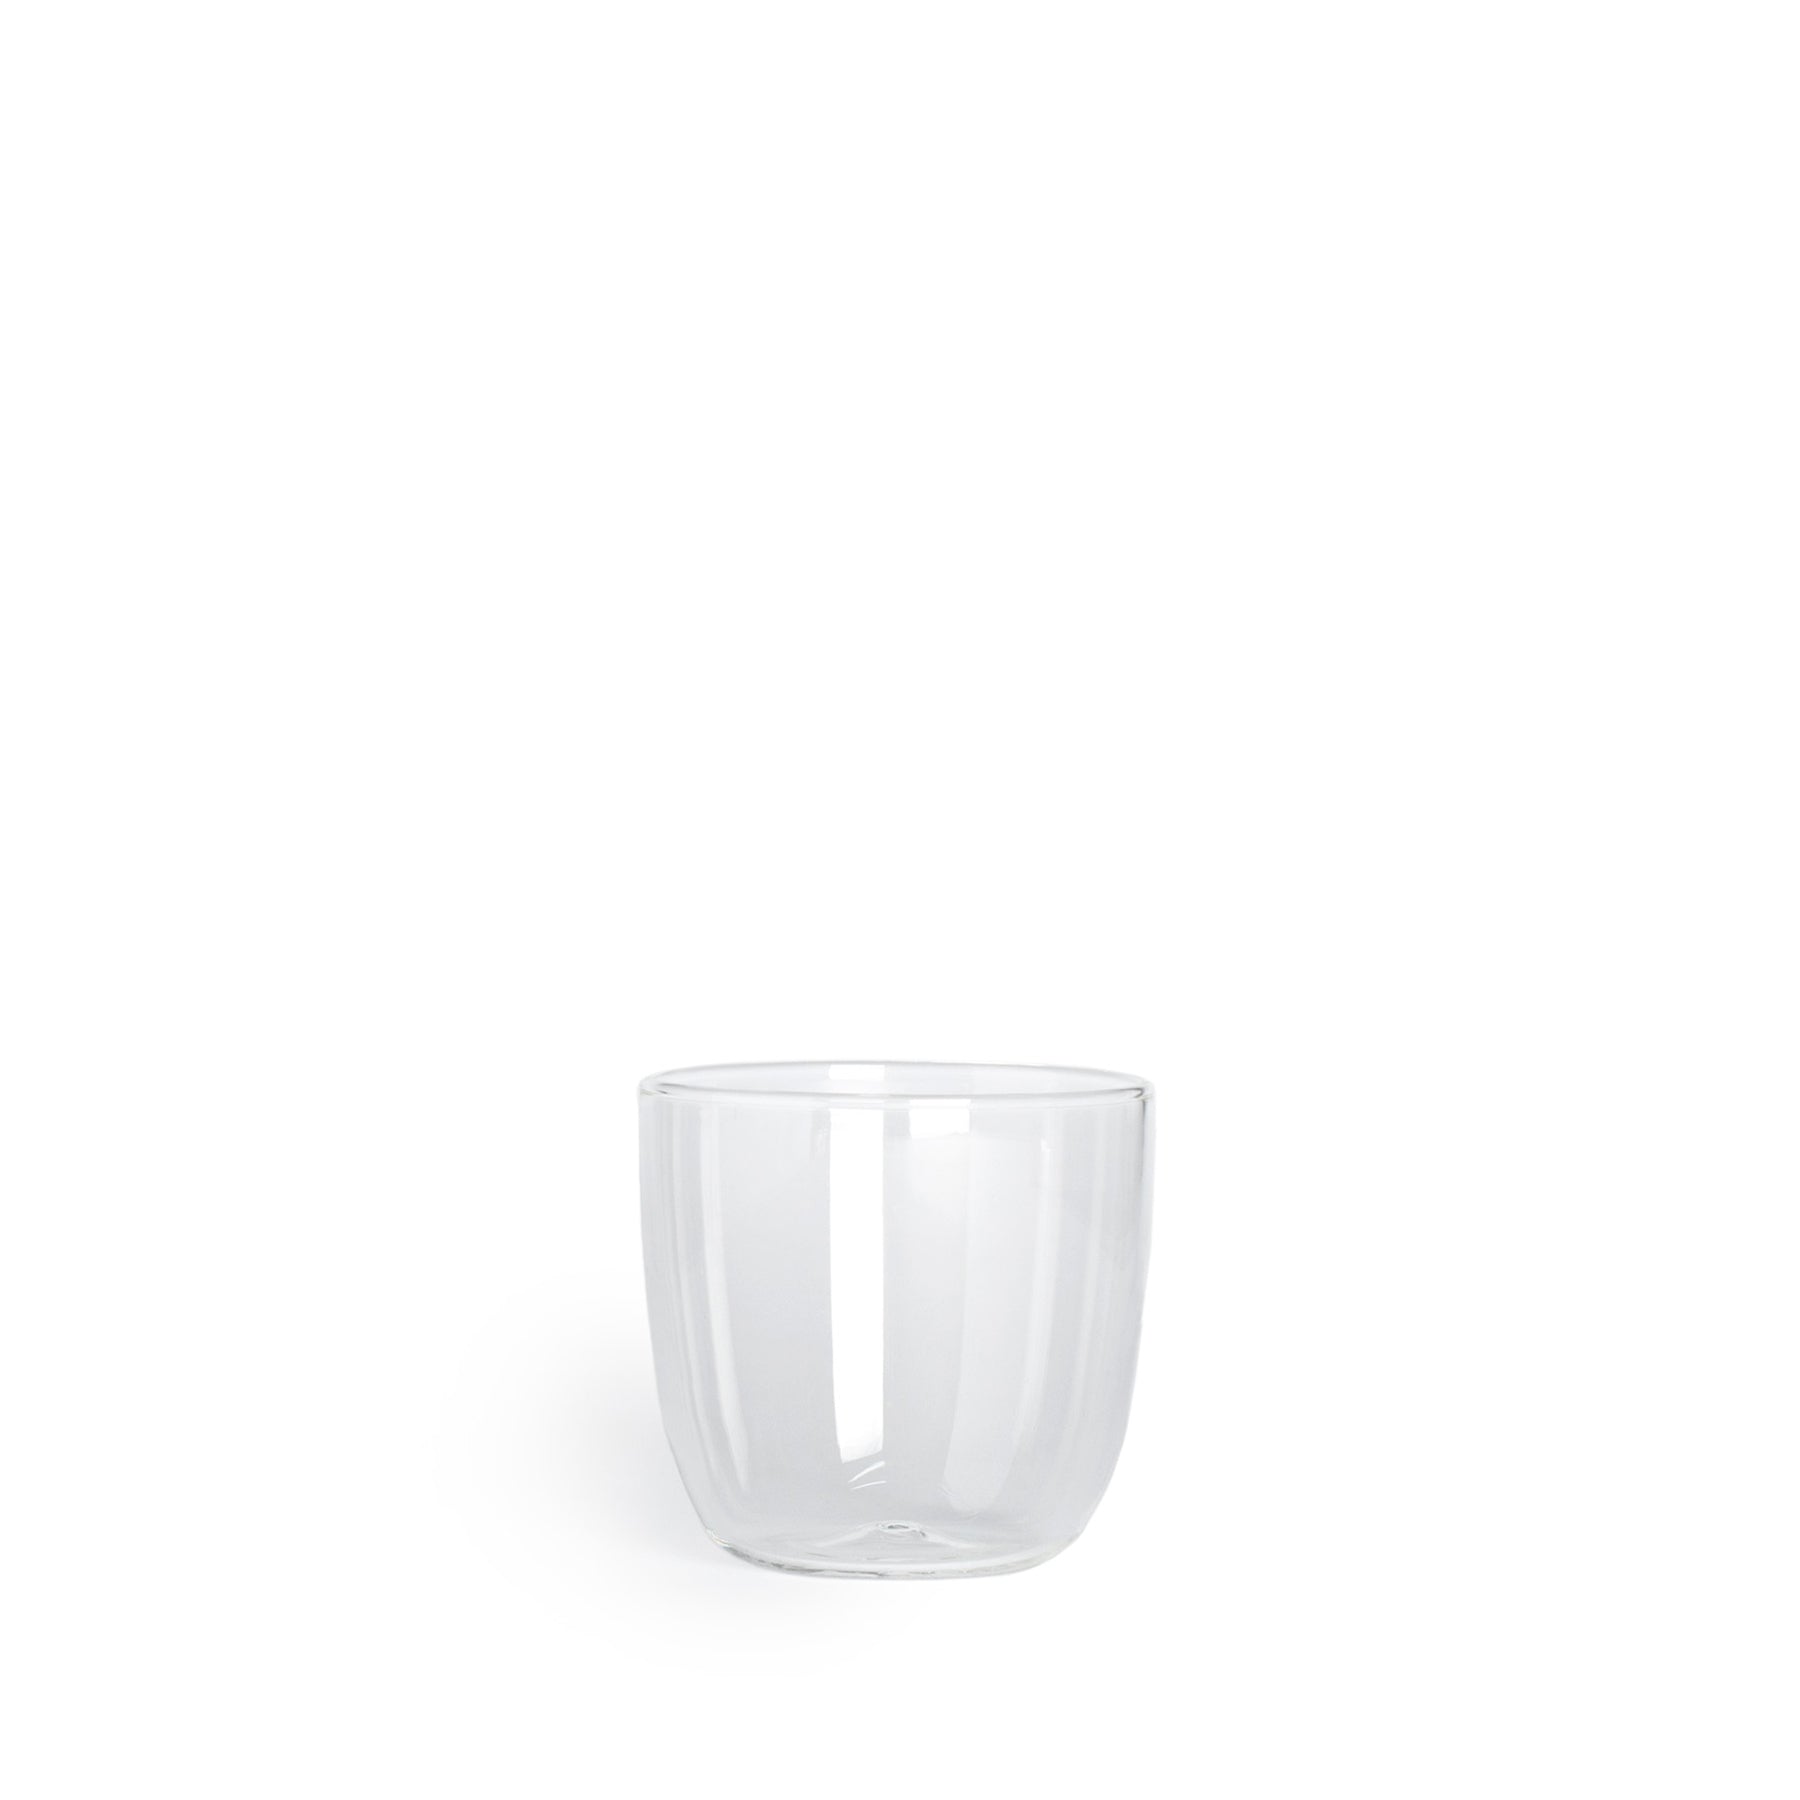 Tuccio Tumbler in Clear (Set of 2) Zoom Image 1